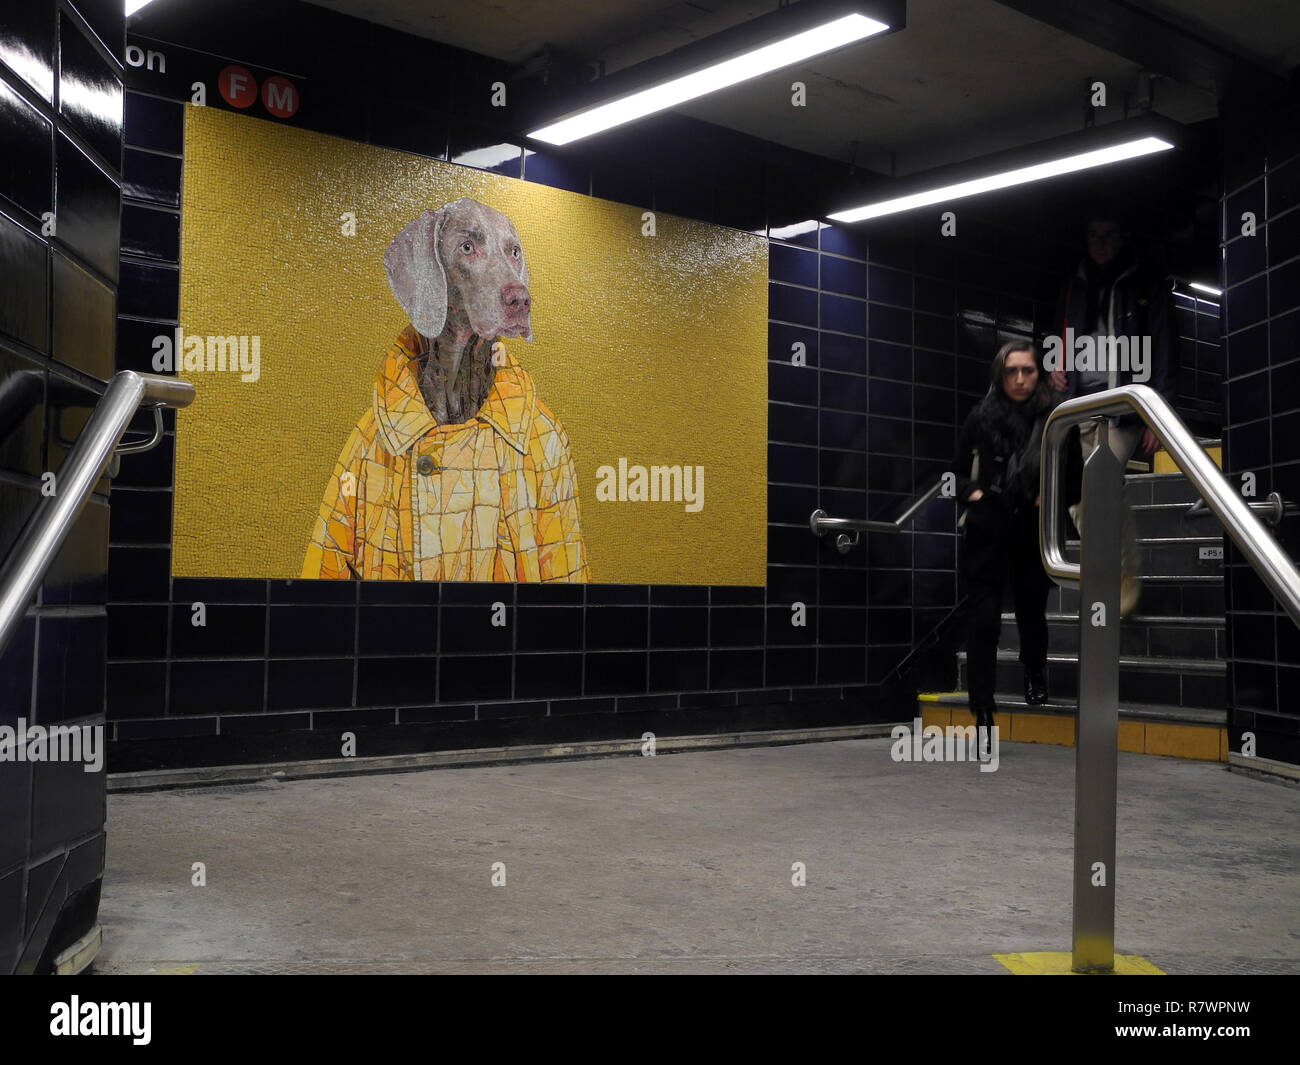 New York, USA. 10th Dec, 2018. A mosaic at 23rd Street underground station shows a work by the artist William Wegman, who regularly photographs his Weimaraner dogs and partly disguises them. (to dpa message: "Waiting dogs: Weimaraner decorate subway station in New York" from 12.12.2018) Credit: Johannes Schmitt-Tegge/dpa/Alamy Live News Stock Photo